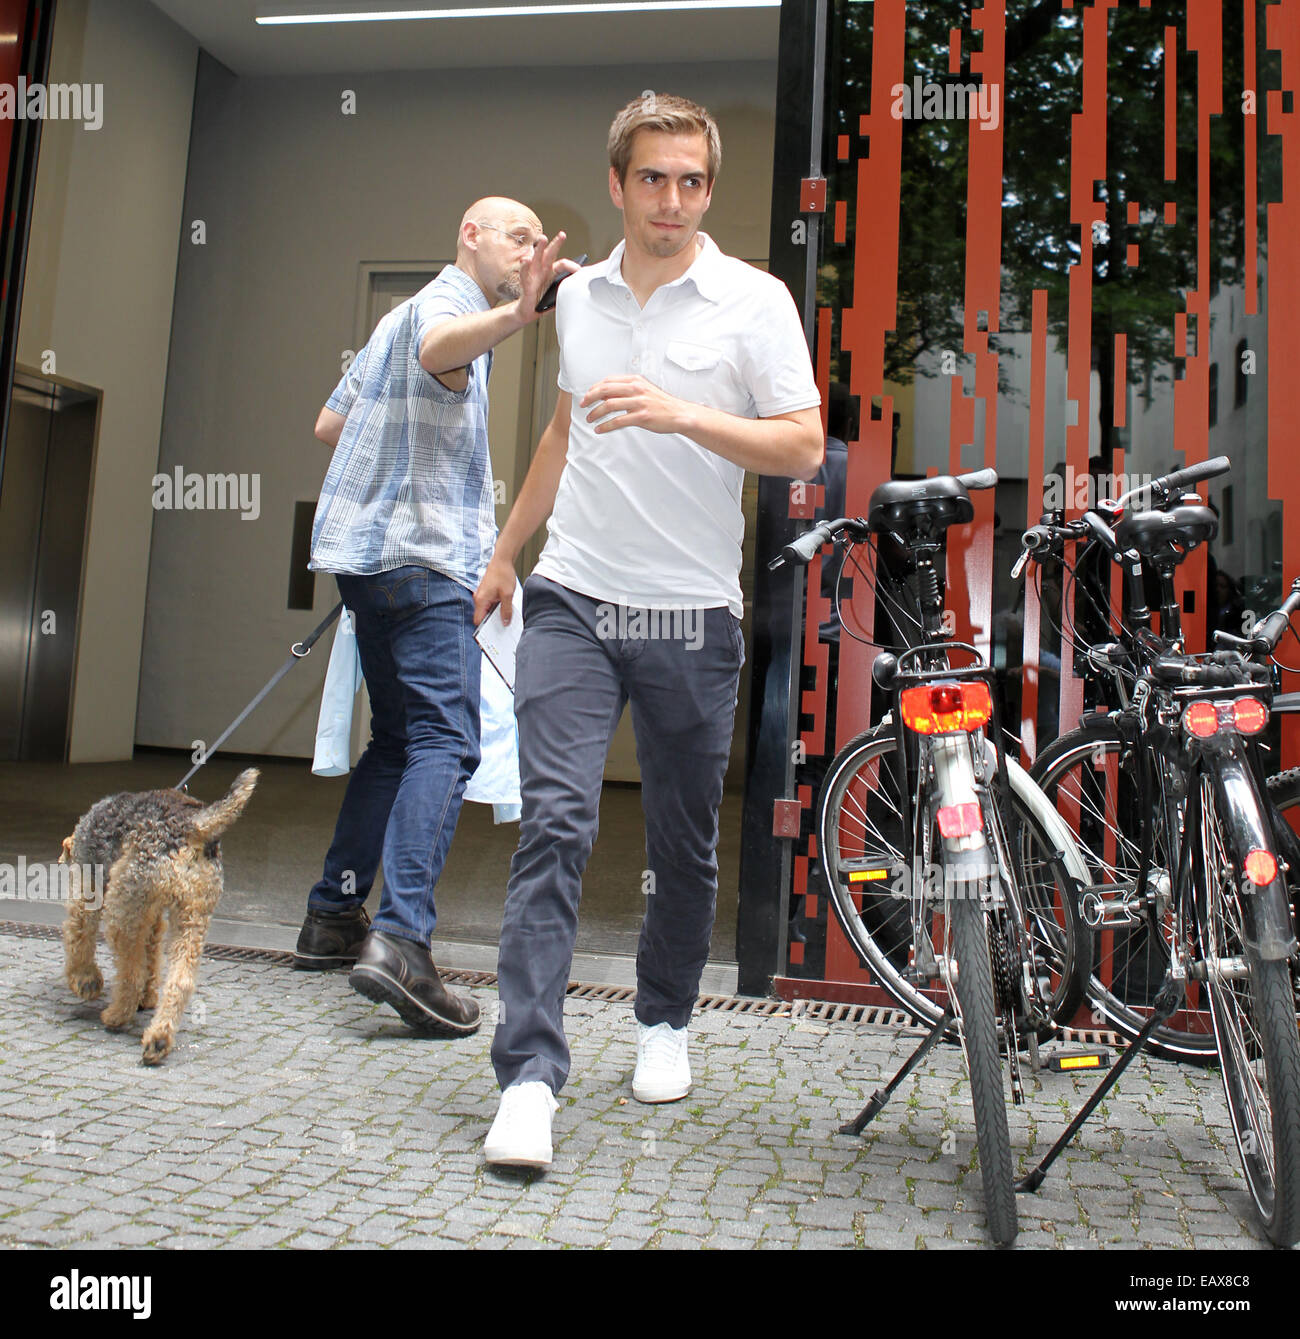 Bayern München player Philipp Lahm leaving Dr. Hans-Wilhelm Müller-Wohlfahrt's medical practice.  Featuring: Philipp Lahm Where: München, Germany When: 19 May 2014 Stock Photo